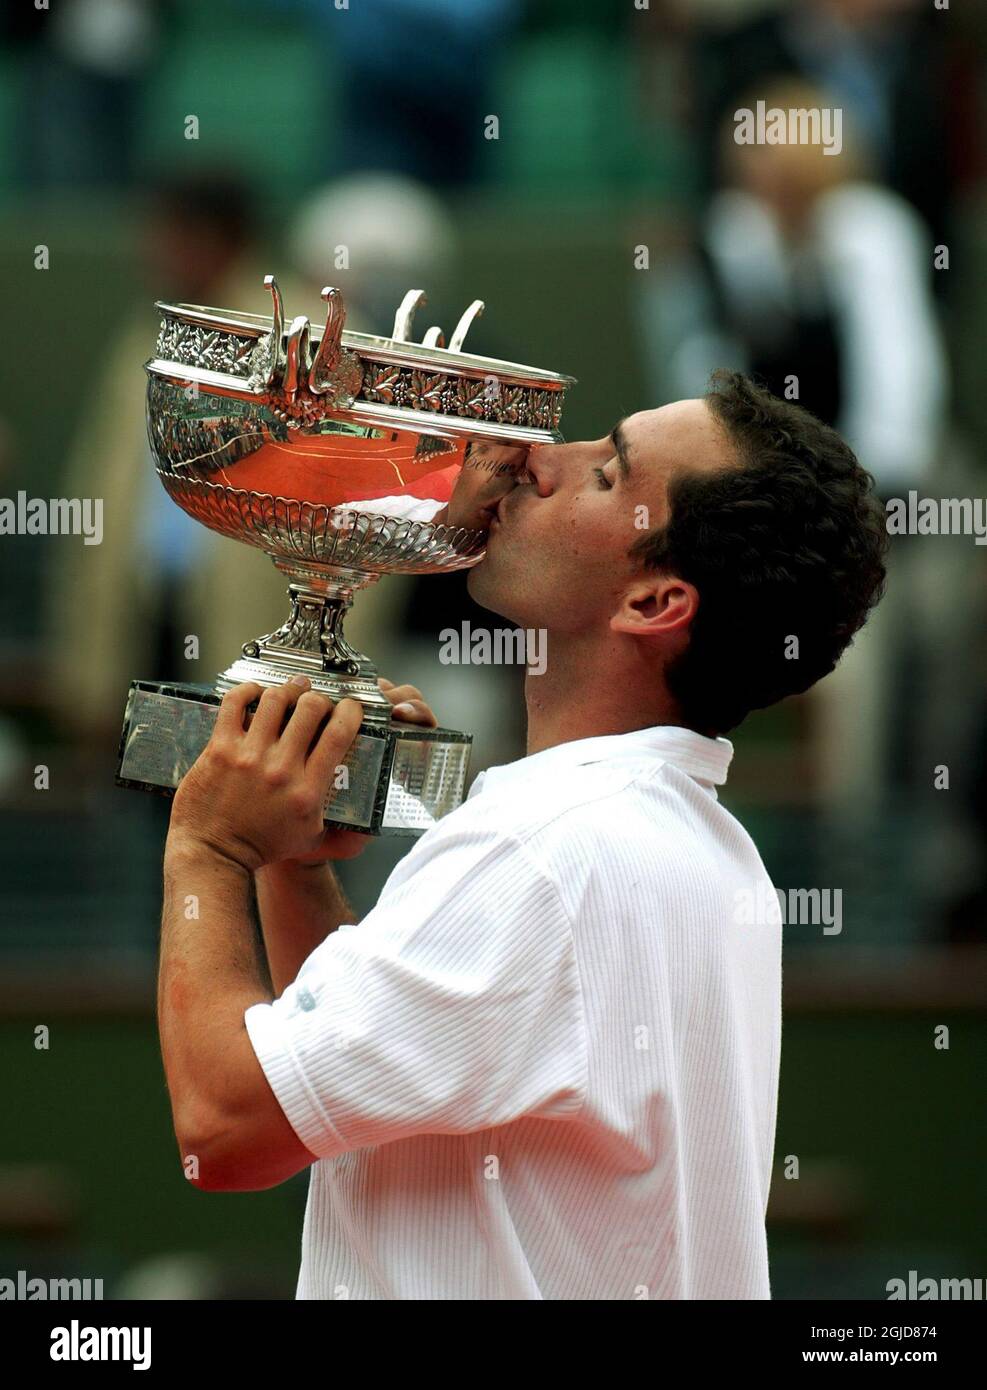 Alberto Costa of Spain kisses the French Open trophy as he celebrates victory over compatriot Juan Carlos Ferrero Stock Photo